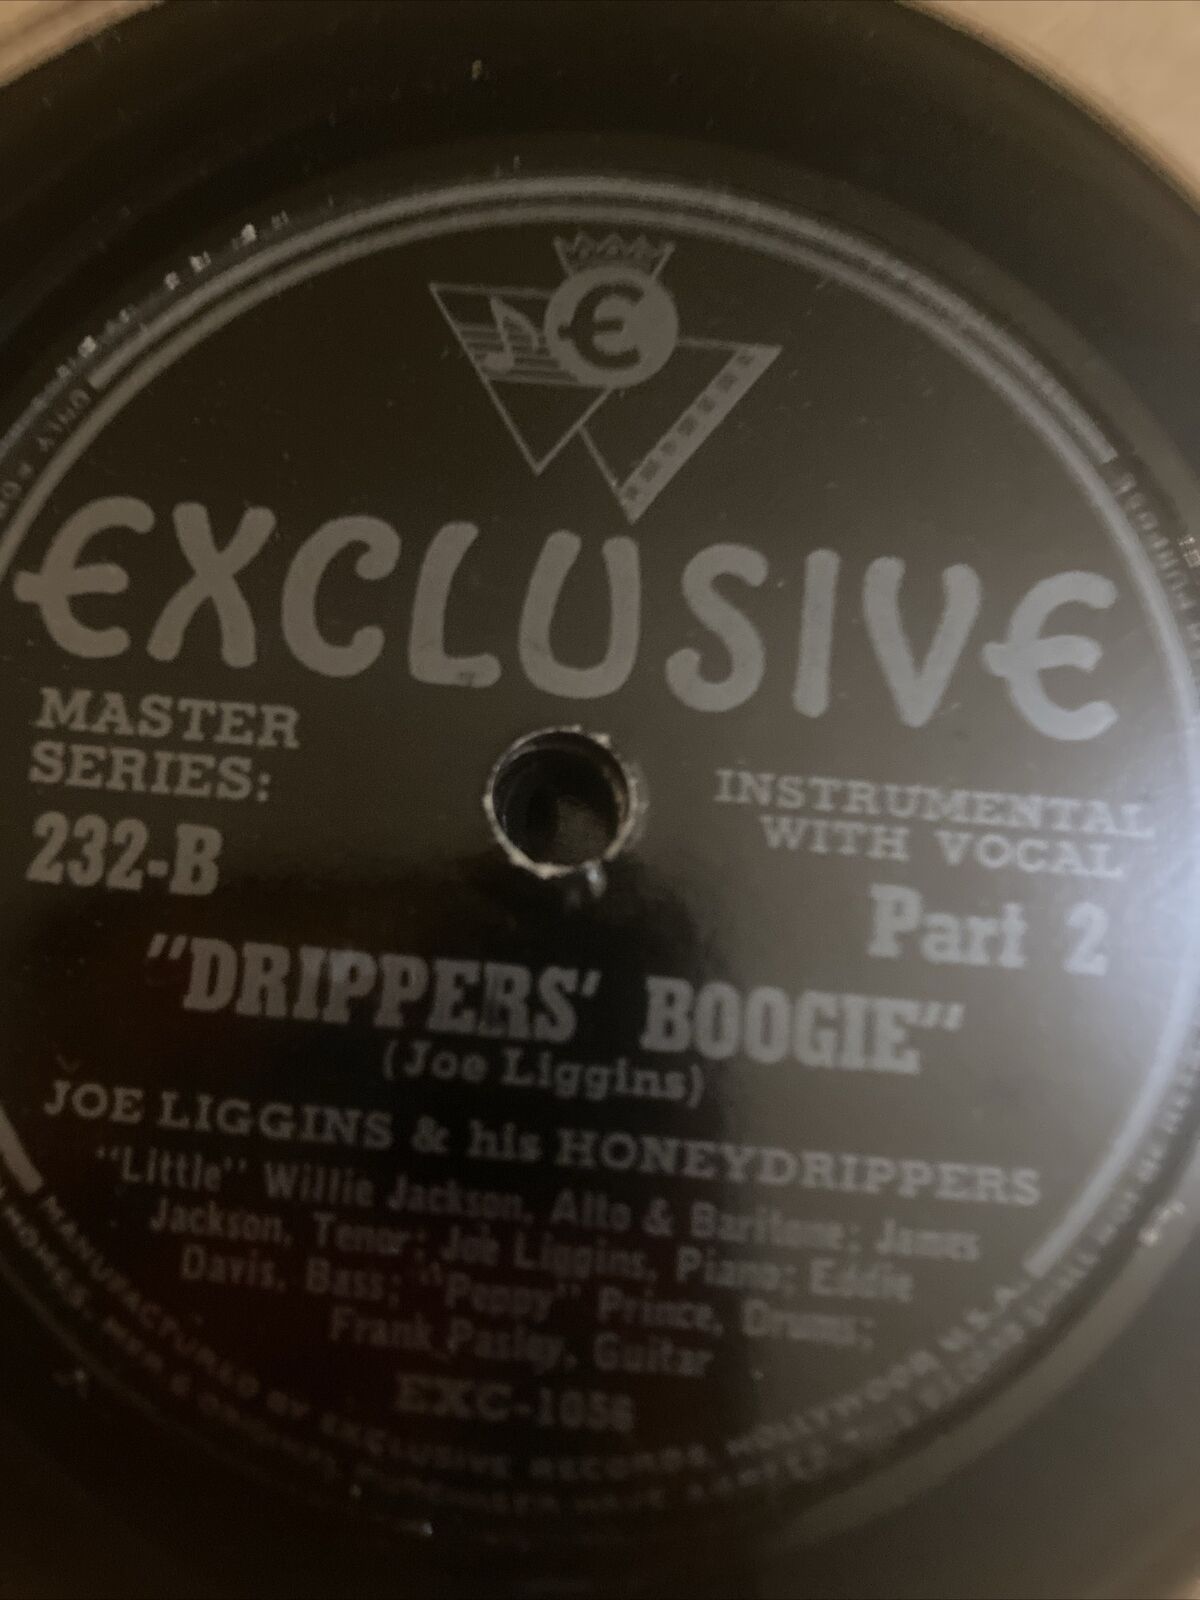 Exclusive record label master series Drippers boogie with Joe and the honey...